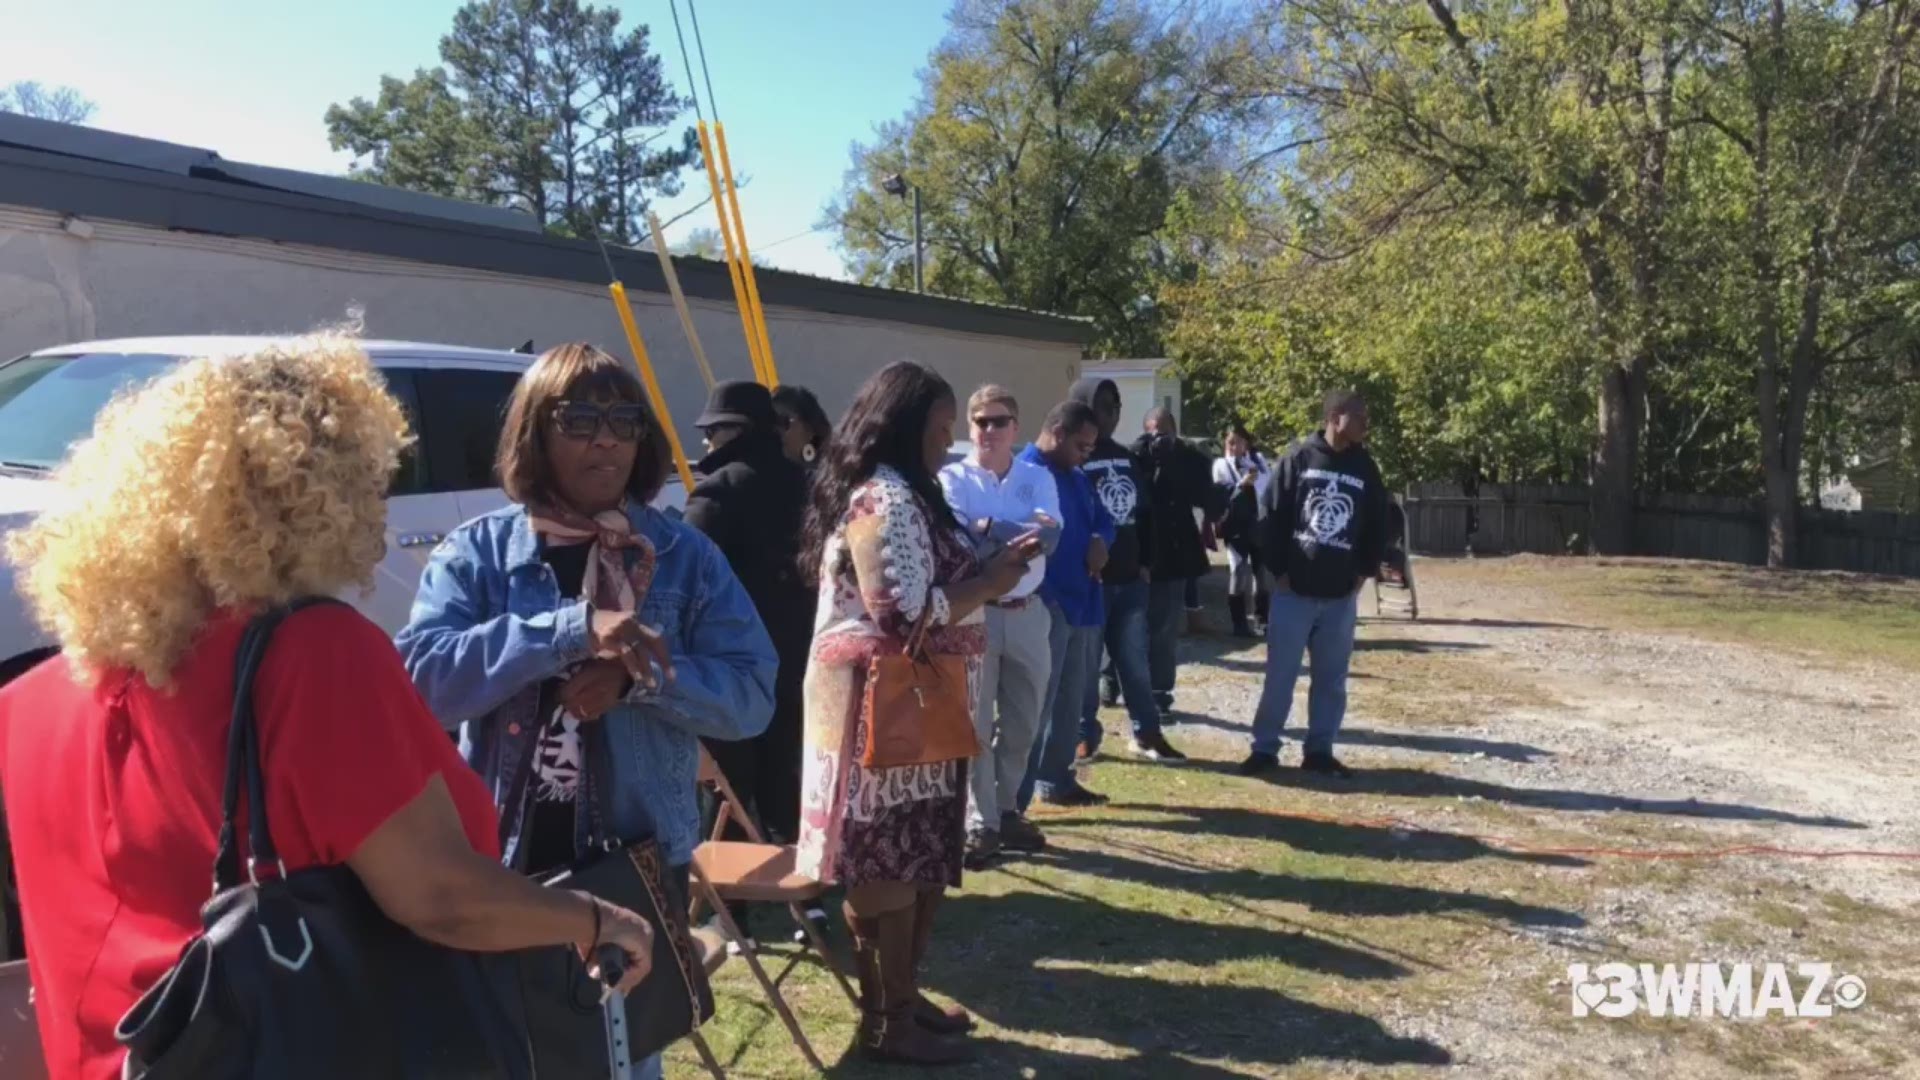 Community leaders are saying 'enough is enough' and speaking out about gun violence in Bibb County